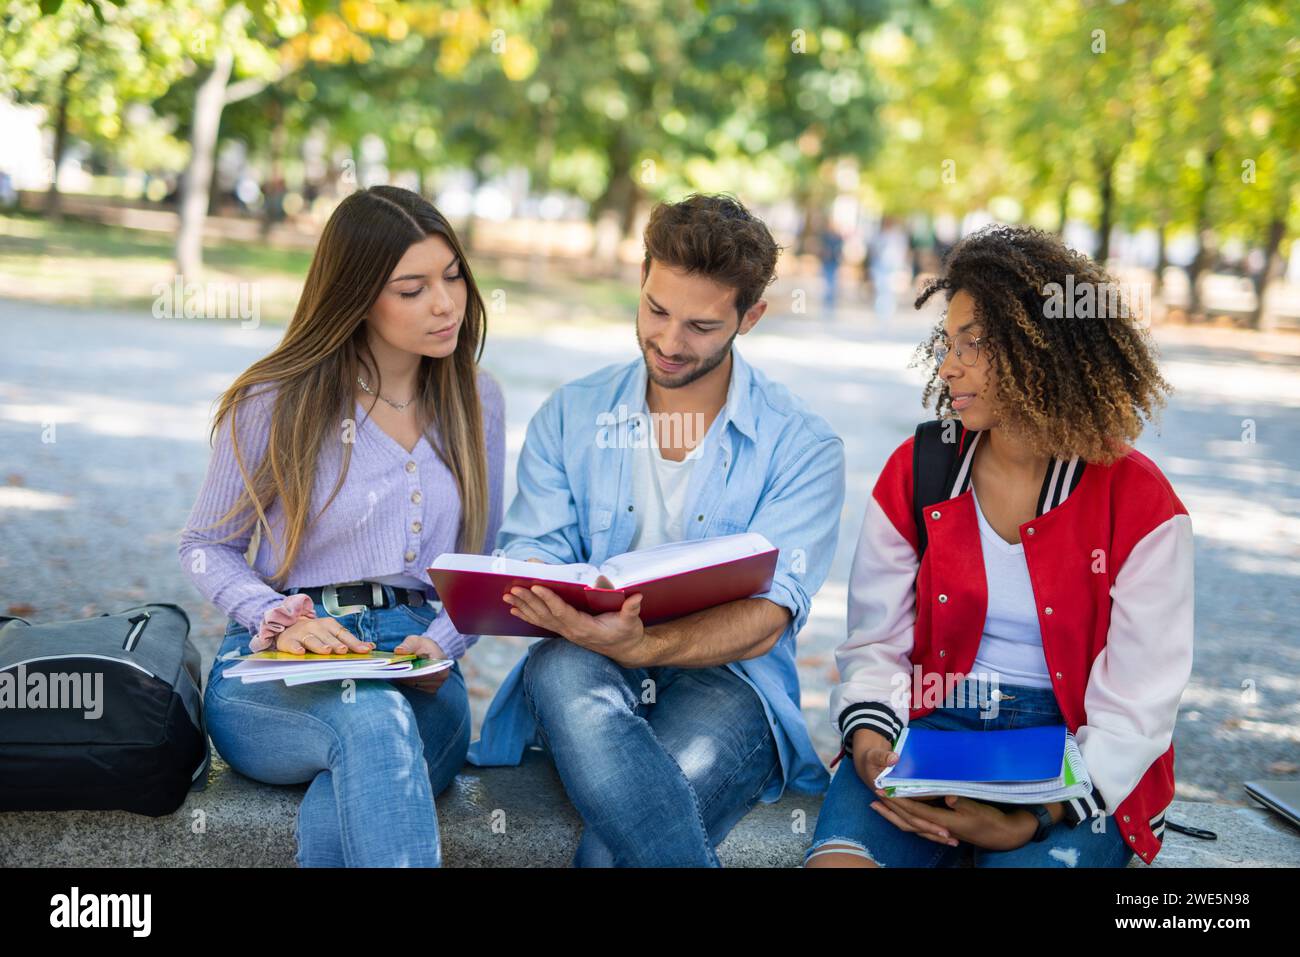 Group of college students studying together in a park Stock Photo